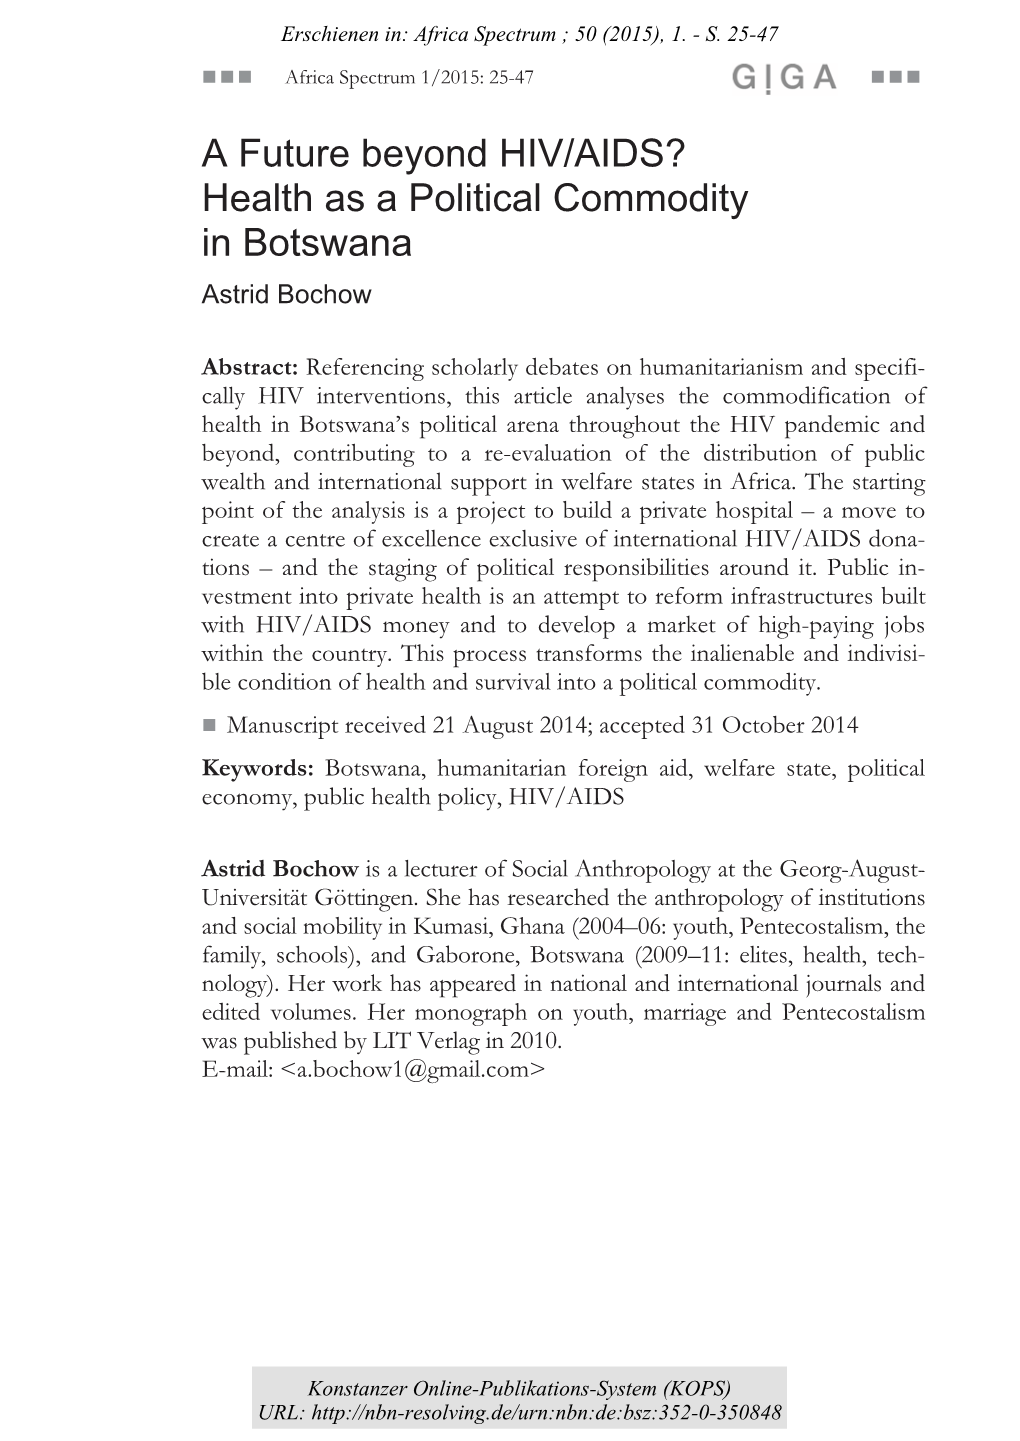 A Future Beyond HIV/AIDS? Health As a Political Commodity in Botswana Astrid Bochow